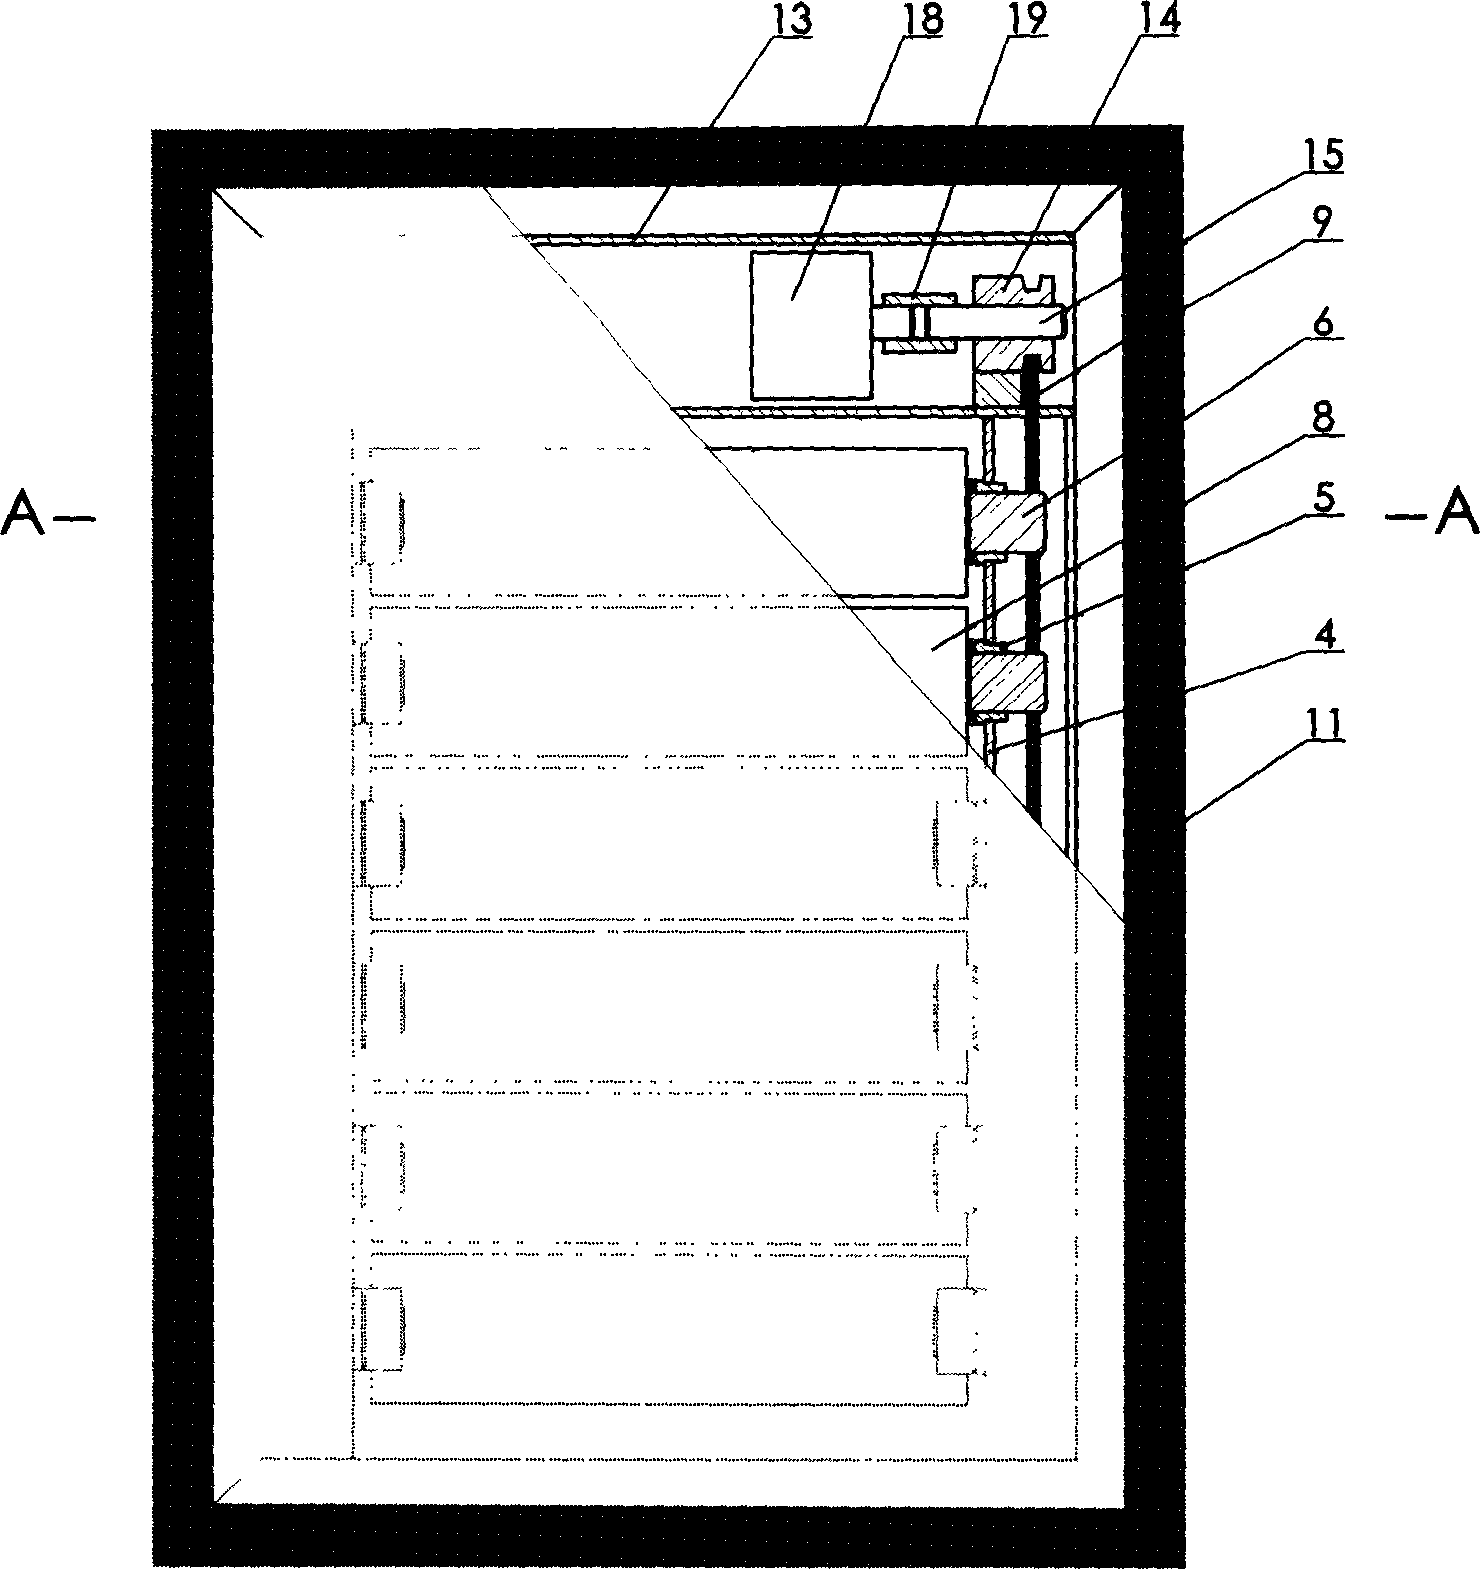 Insulating glass with built-in photovoltaic shutter